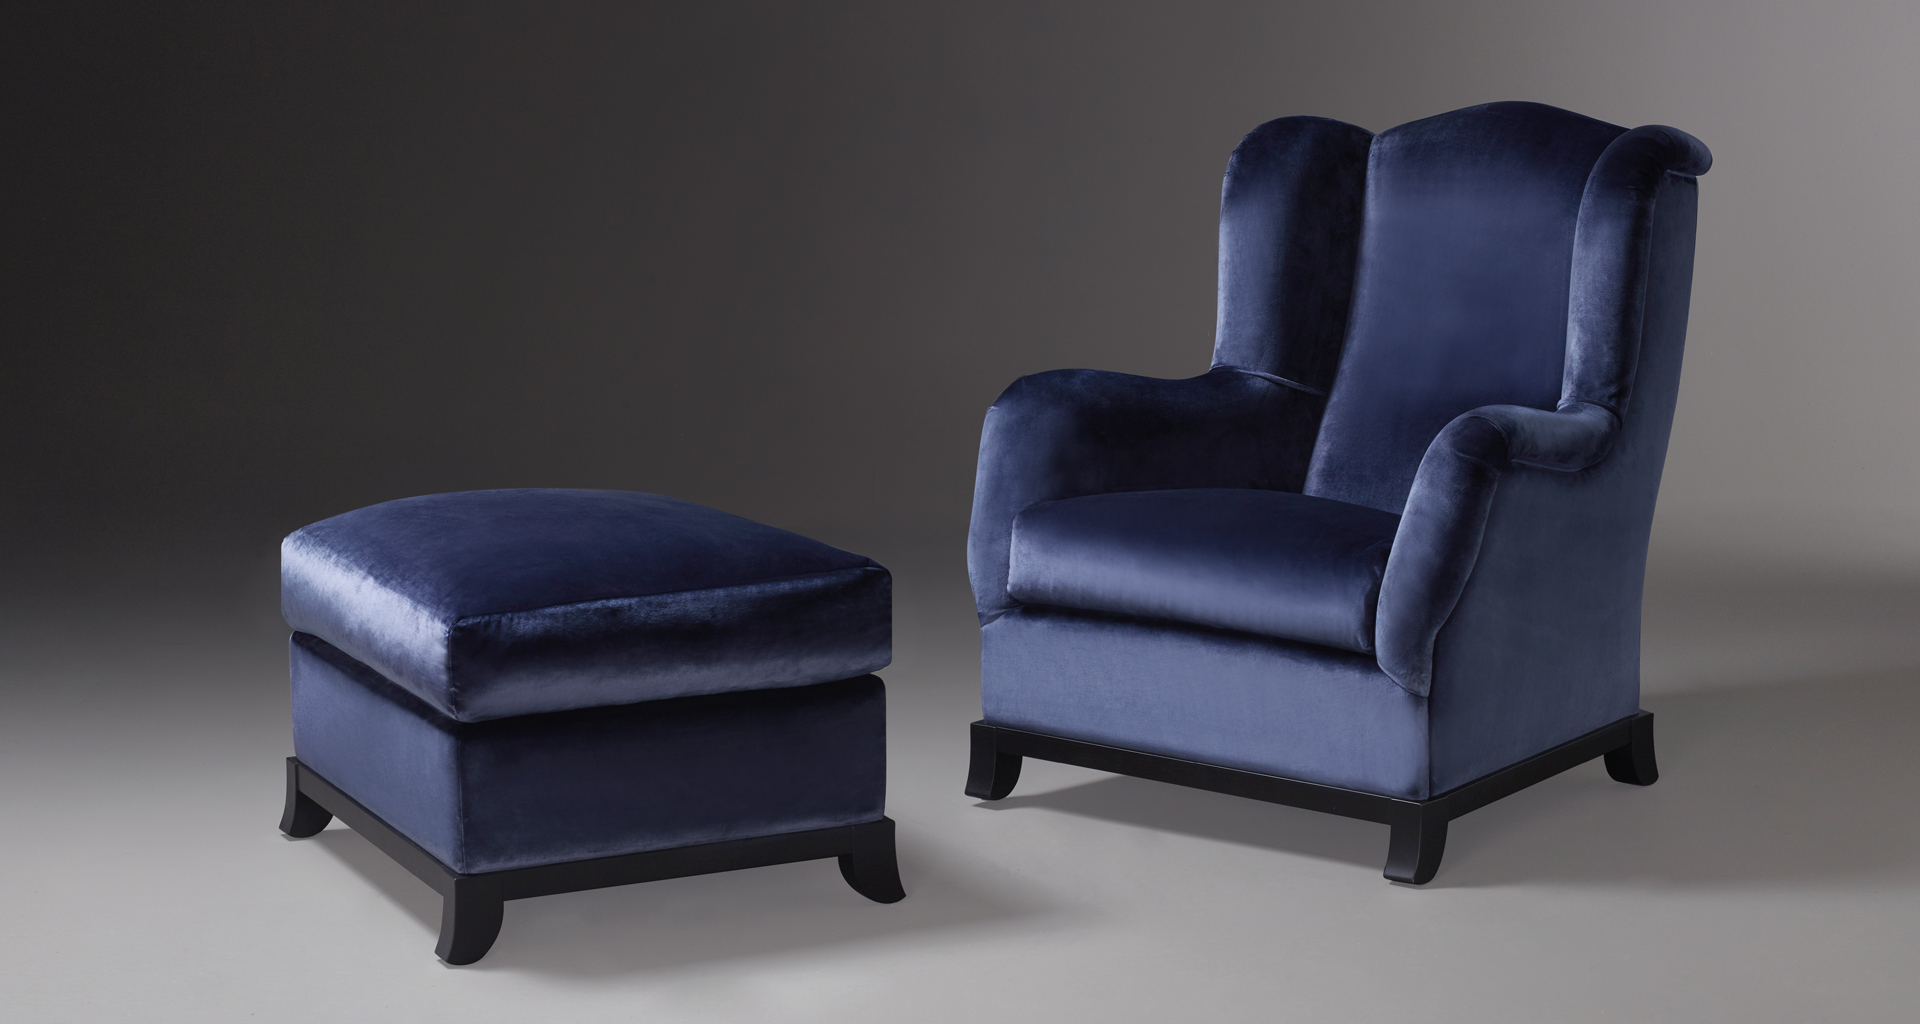 Madame A is an armchair covered in fabric or leather with wooden base, from Promemoria's catalogue | Promemoria